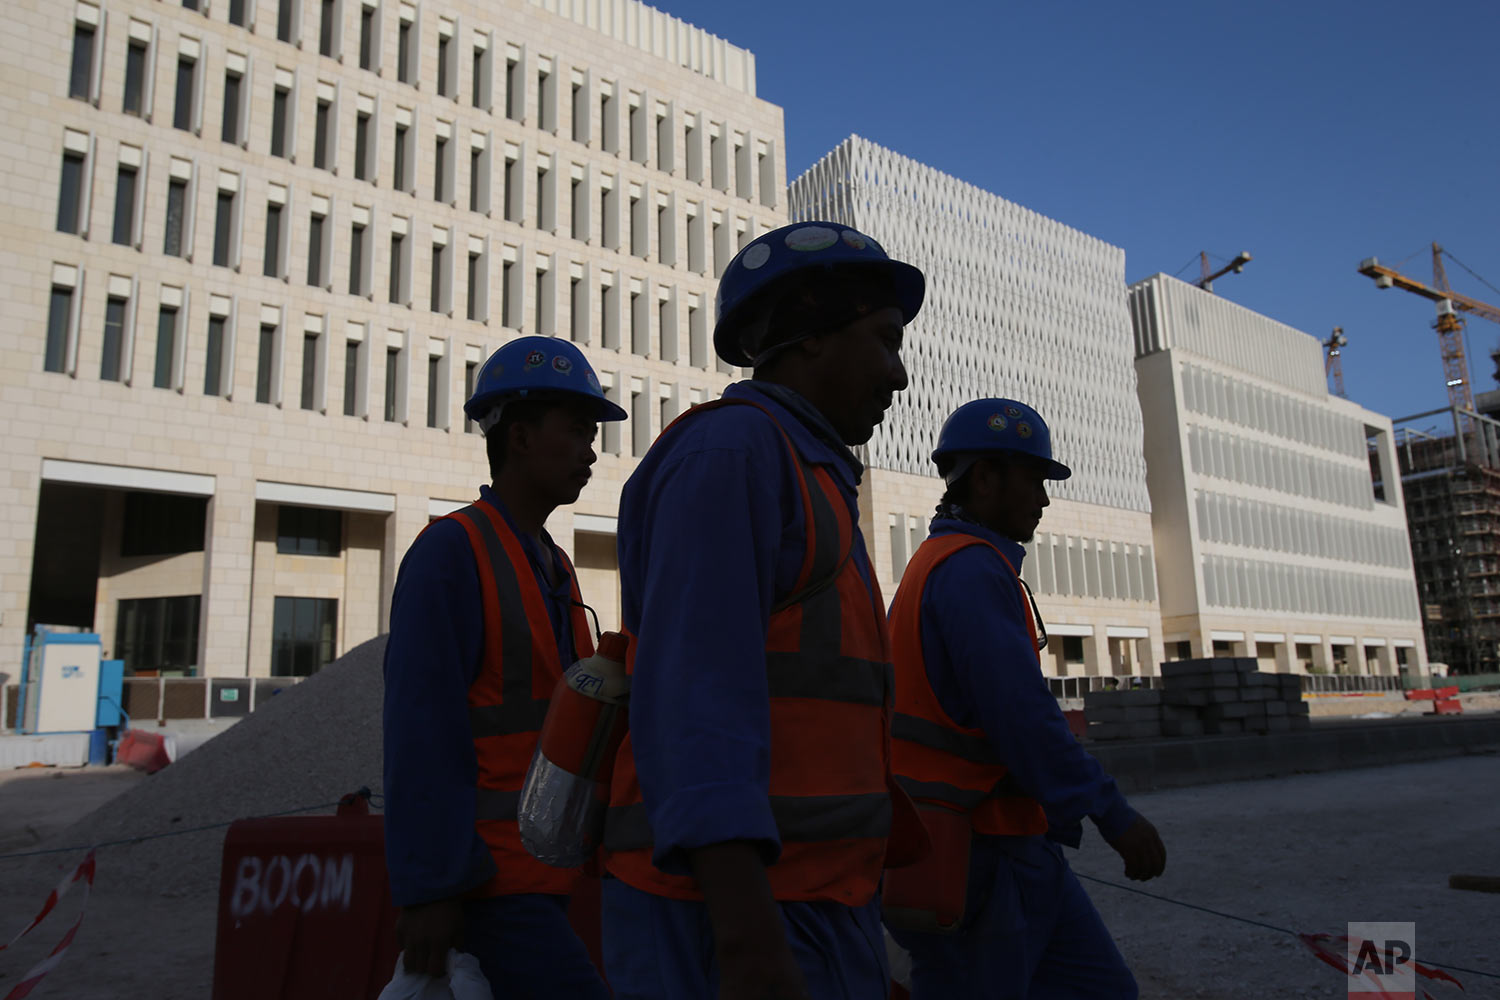  In this Tuesday, April 23, 2019 photo, labours leave their construction sites at the Msheireb Downtown Doha district in Doha, Qatar. (AP Photo/Kamran Jebreili) 